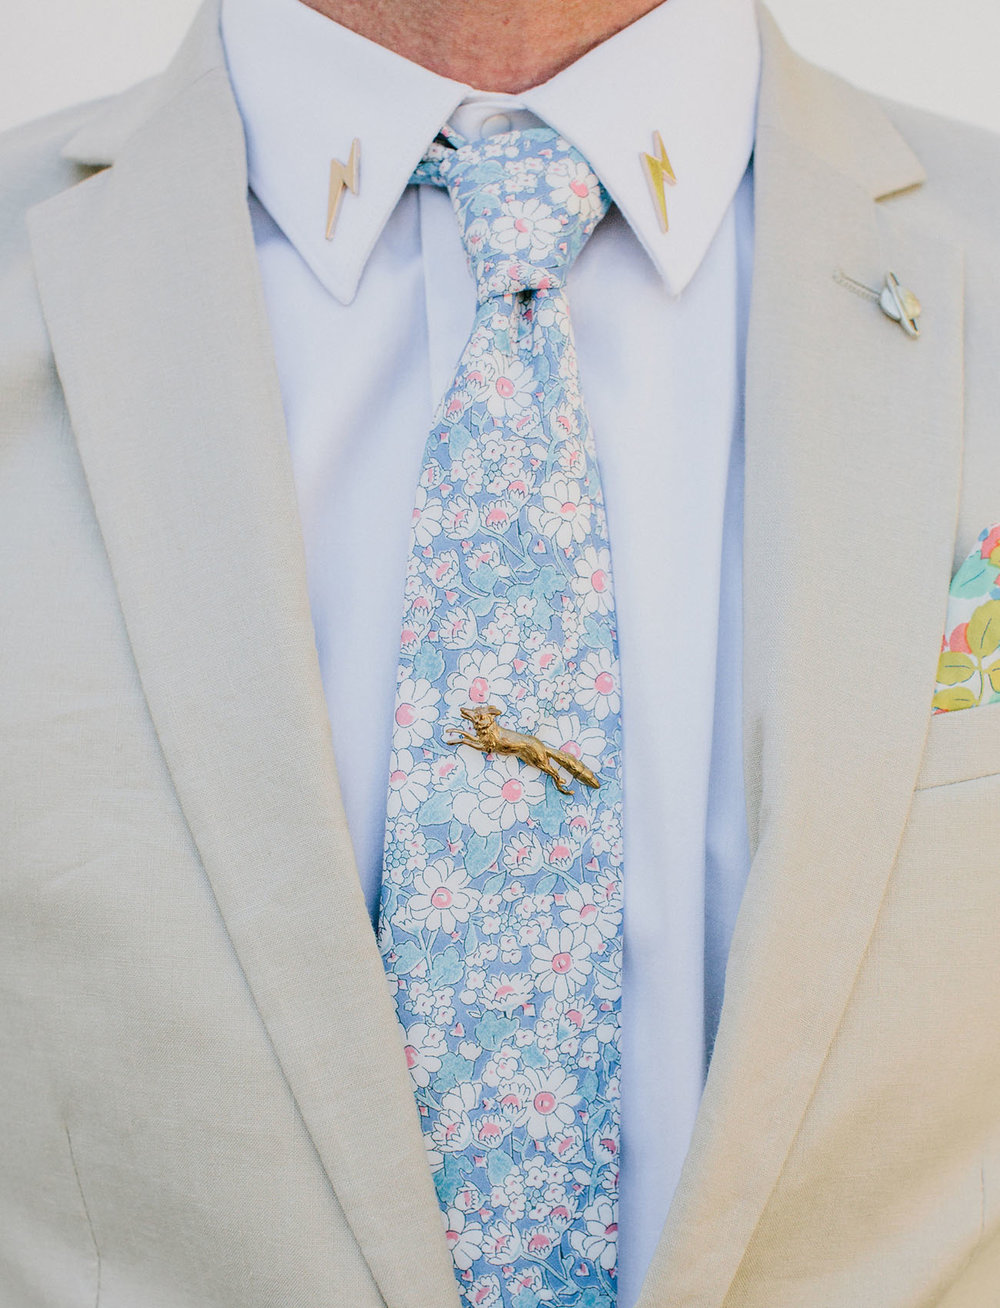  We’re diggin’ this floral tie + linen suit from  ASOS  (perfect for the beach wedding, might we add). 